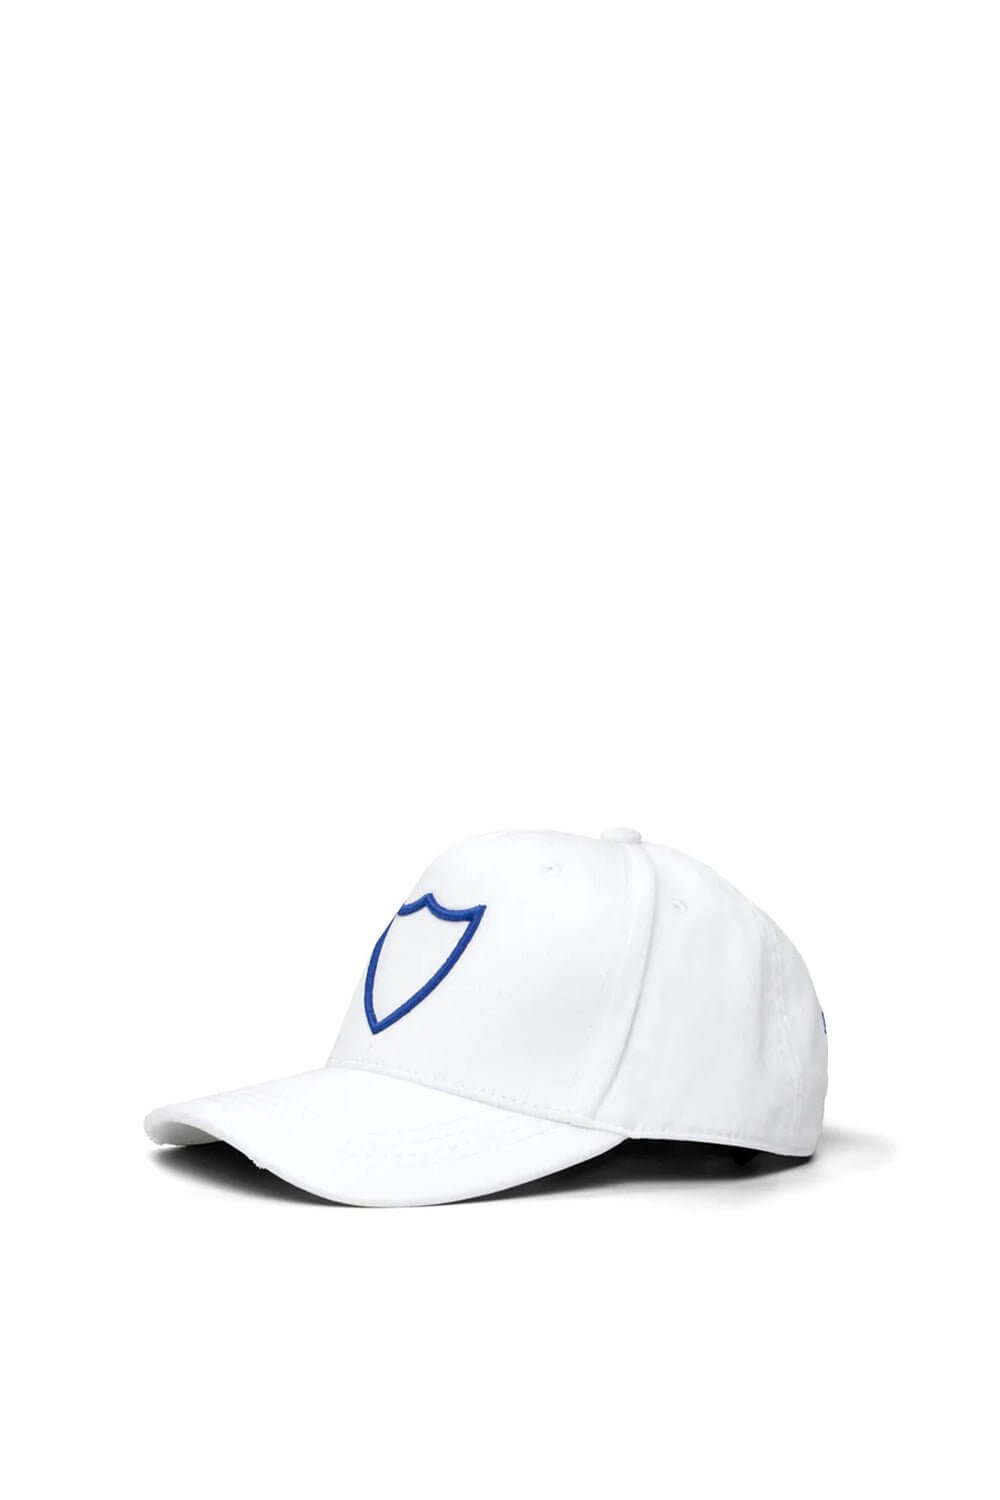 HTC LOGO BASEBALL CAP White baseball cap with preformed peak, round crown with eyelets, HTC Los Angeles shield logo embroidered on the front, adjustable strap on the back. One size fits all. 100% cotton. HTC LOS ANGELES